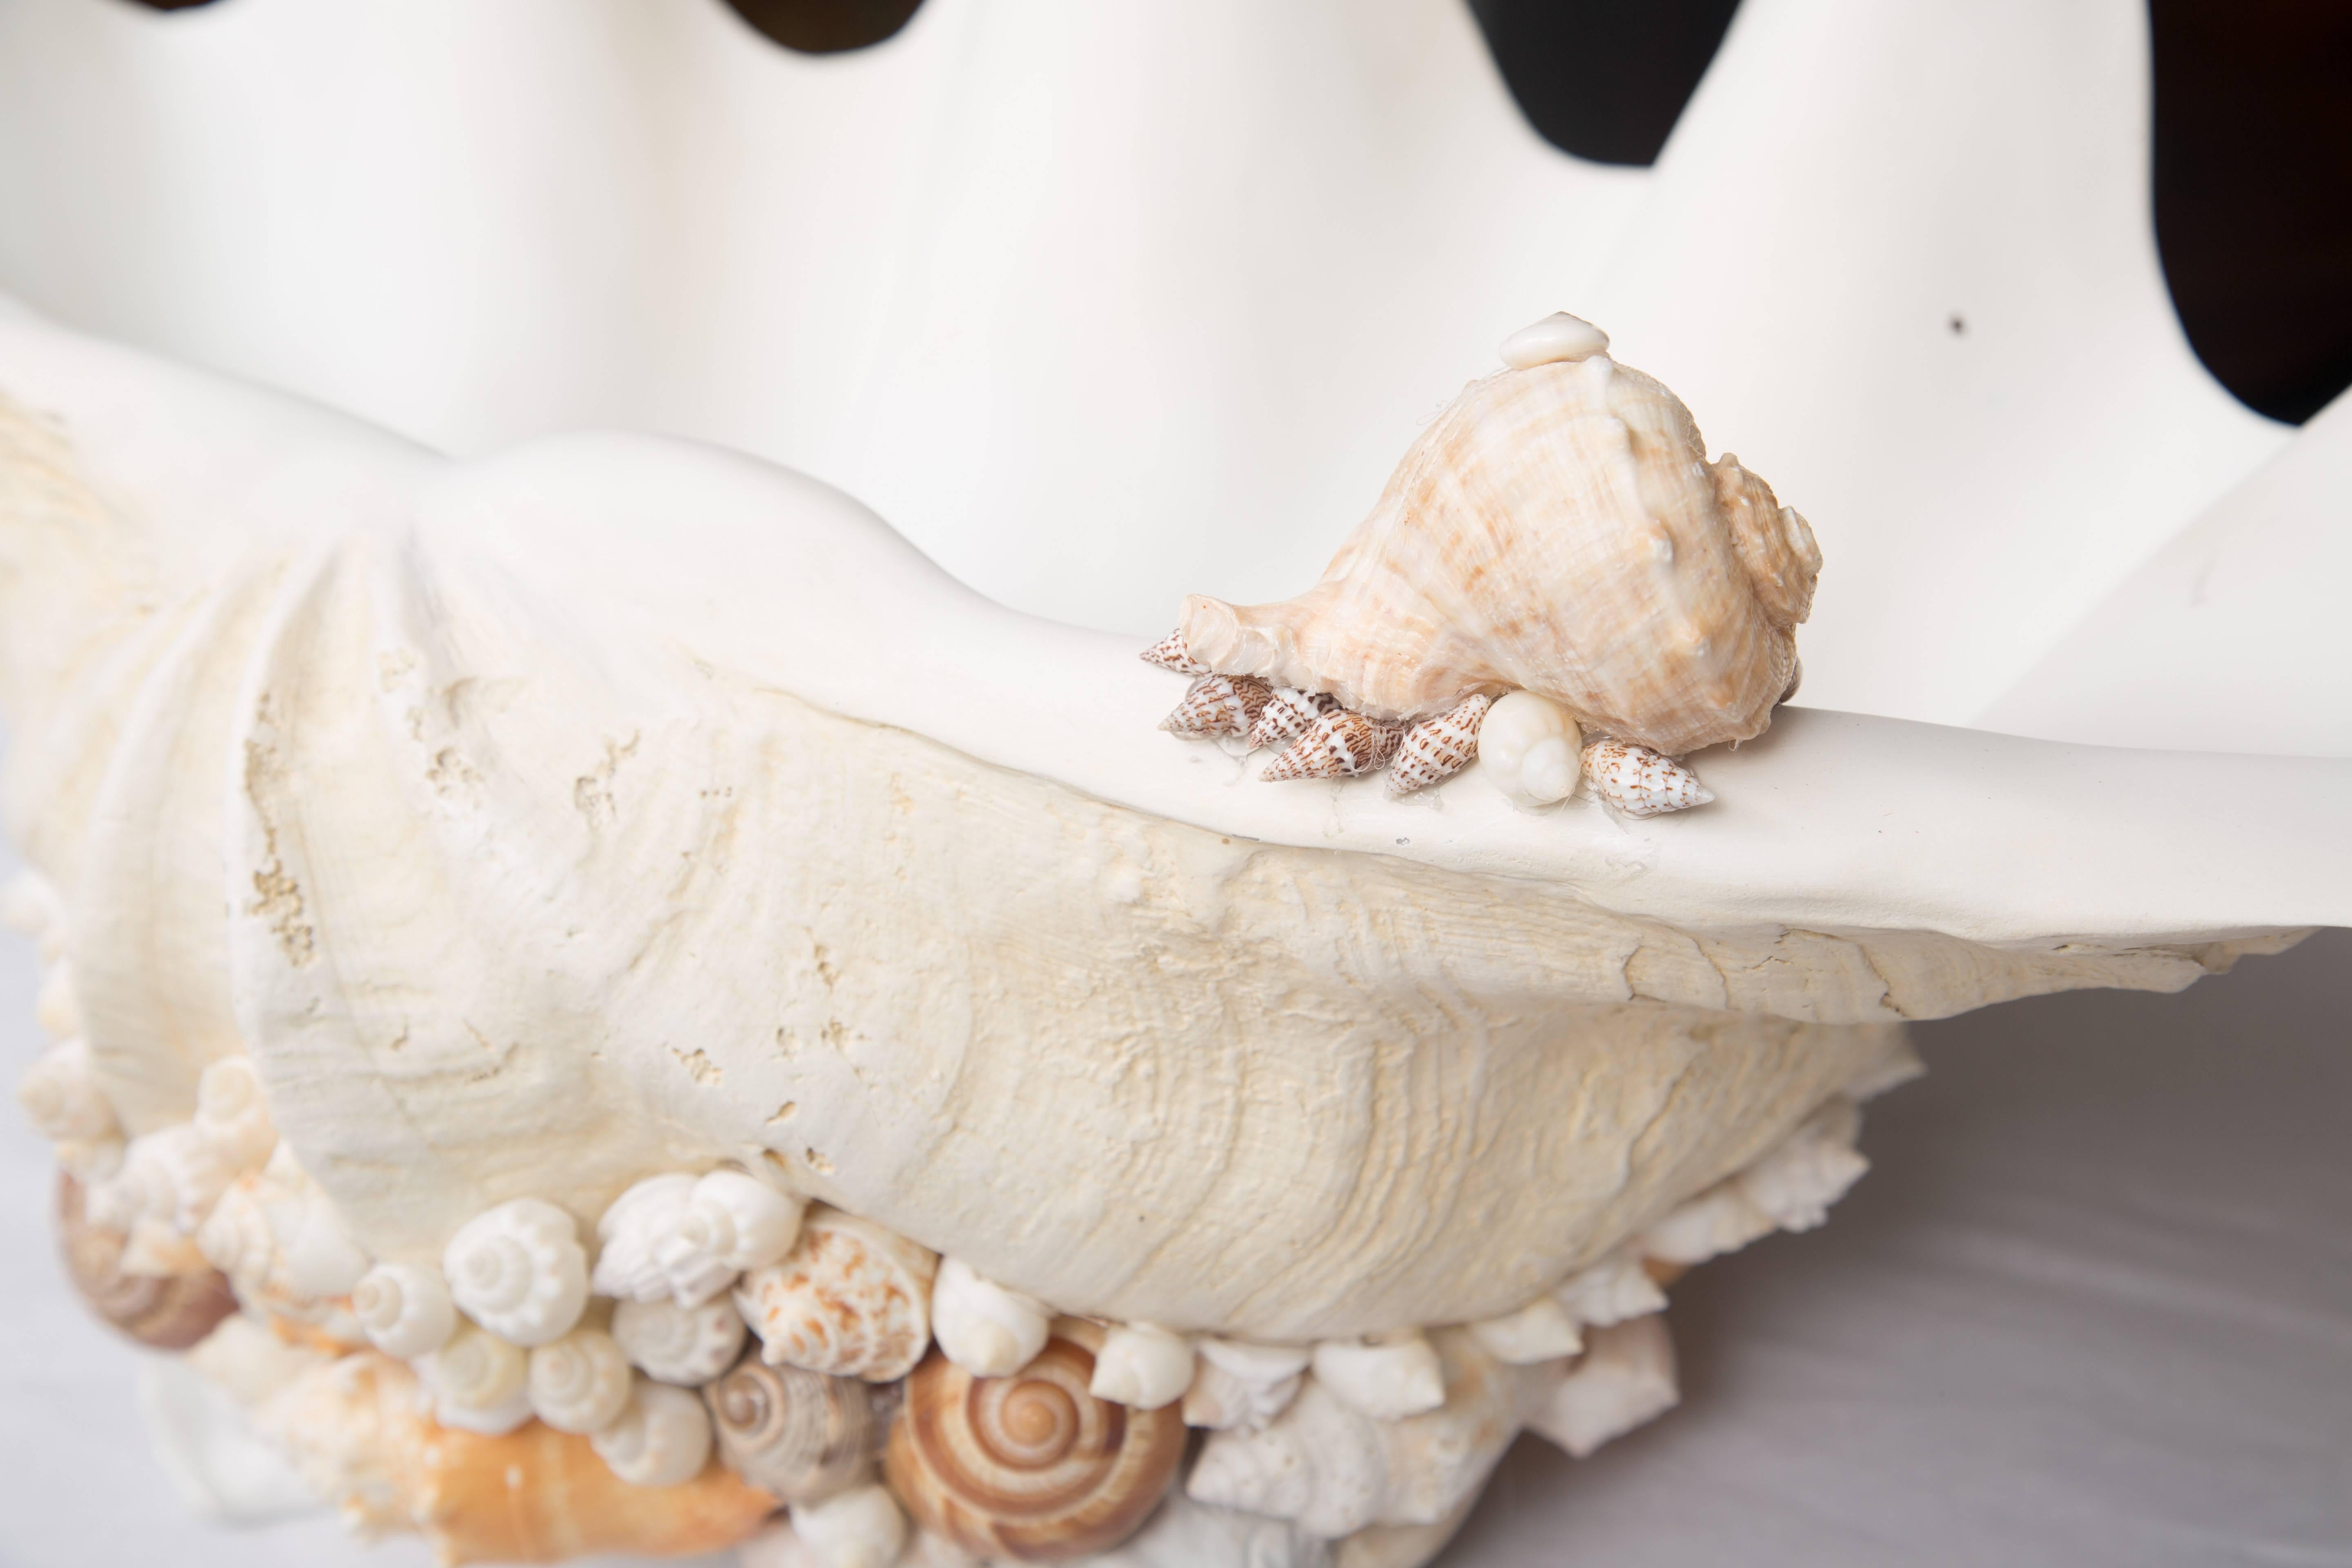 This splendid decoration represents the organic nature of the sea. The large clam shell composed in the form of a natural shell is decorated and encrusted with natural sea shells.